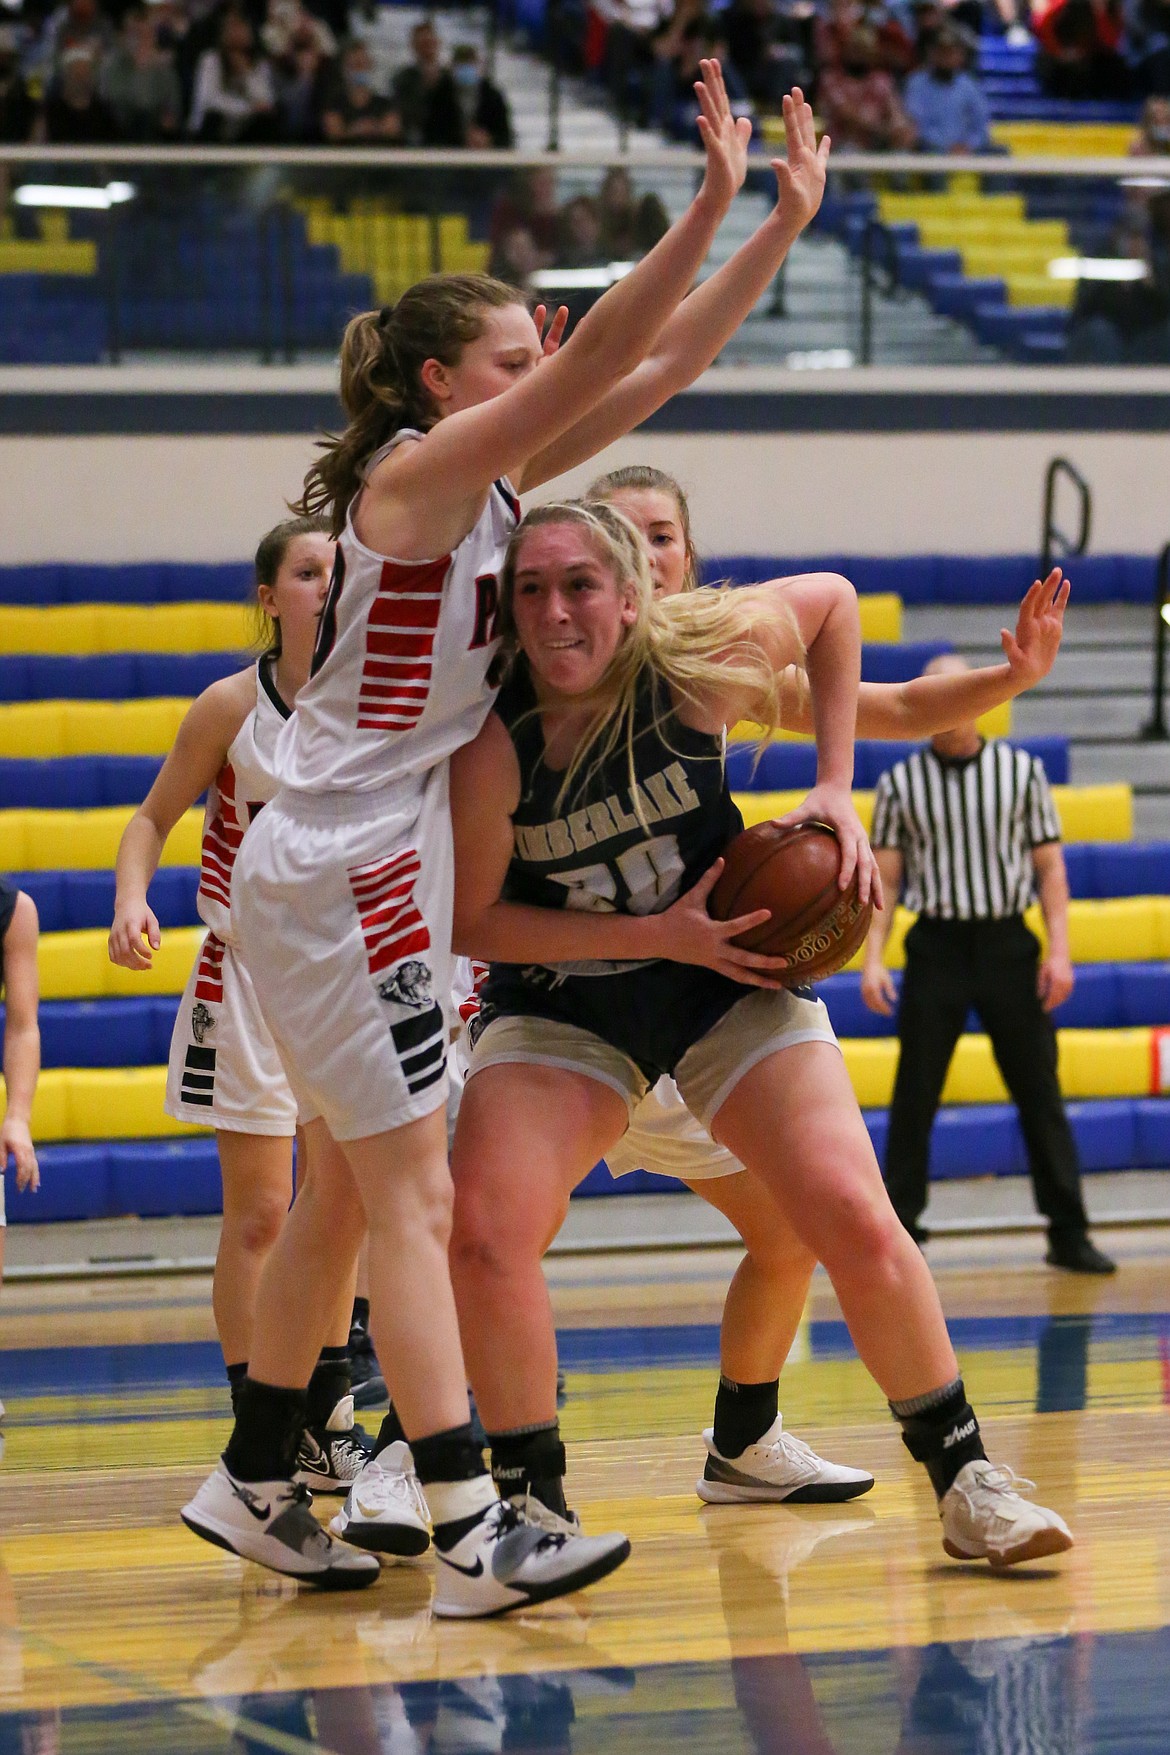 JASON DUCHOW PHOTOGRAPY
Brooke Jessen (20) of Timberlake makes a move to the basket against Parma on Friday night in the semifinals of the state 3A girls basketball tournament at Middleton High.